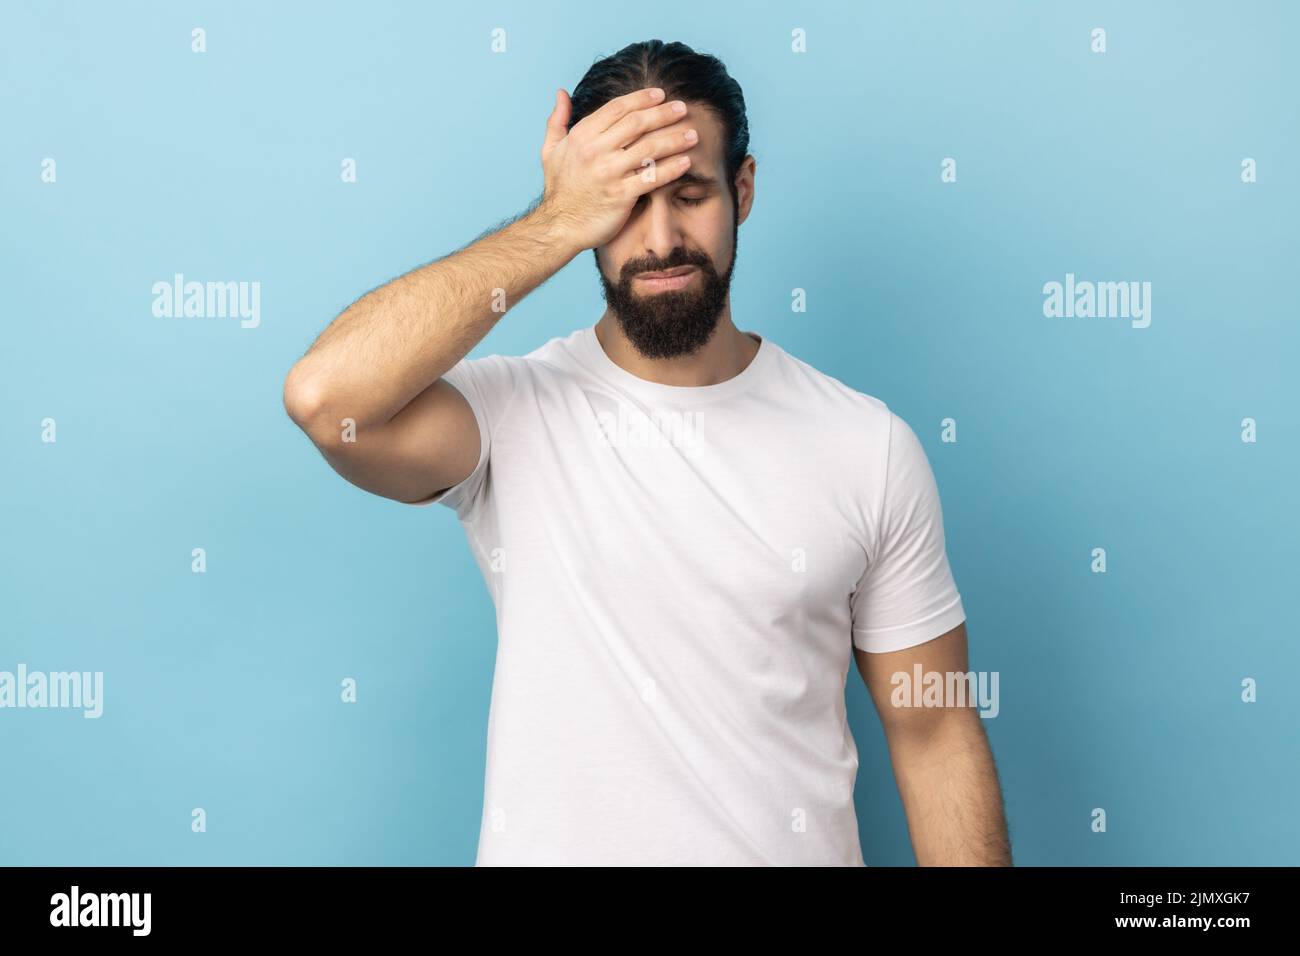 Portrait of unlucky man with beard wearing white T-shirt standing with facepalm gesture, feeling regret and sorrow, blaming herself for mistake. Indoor studio shot isolated on blue background. Stock Photo